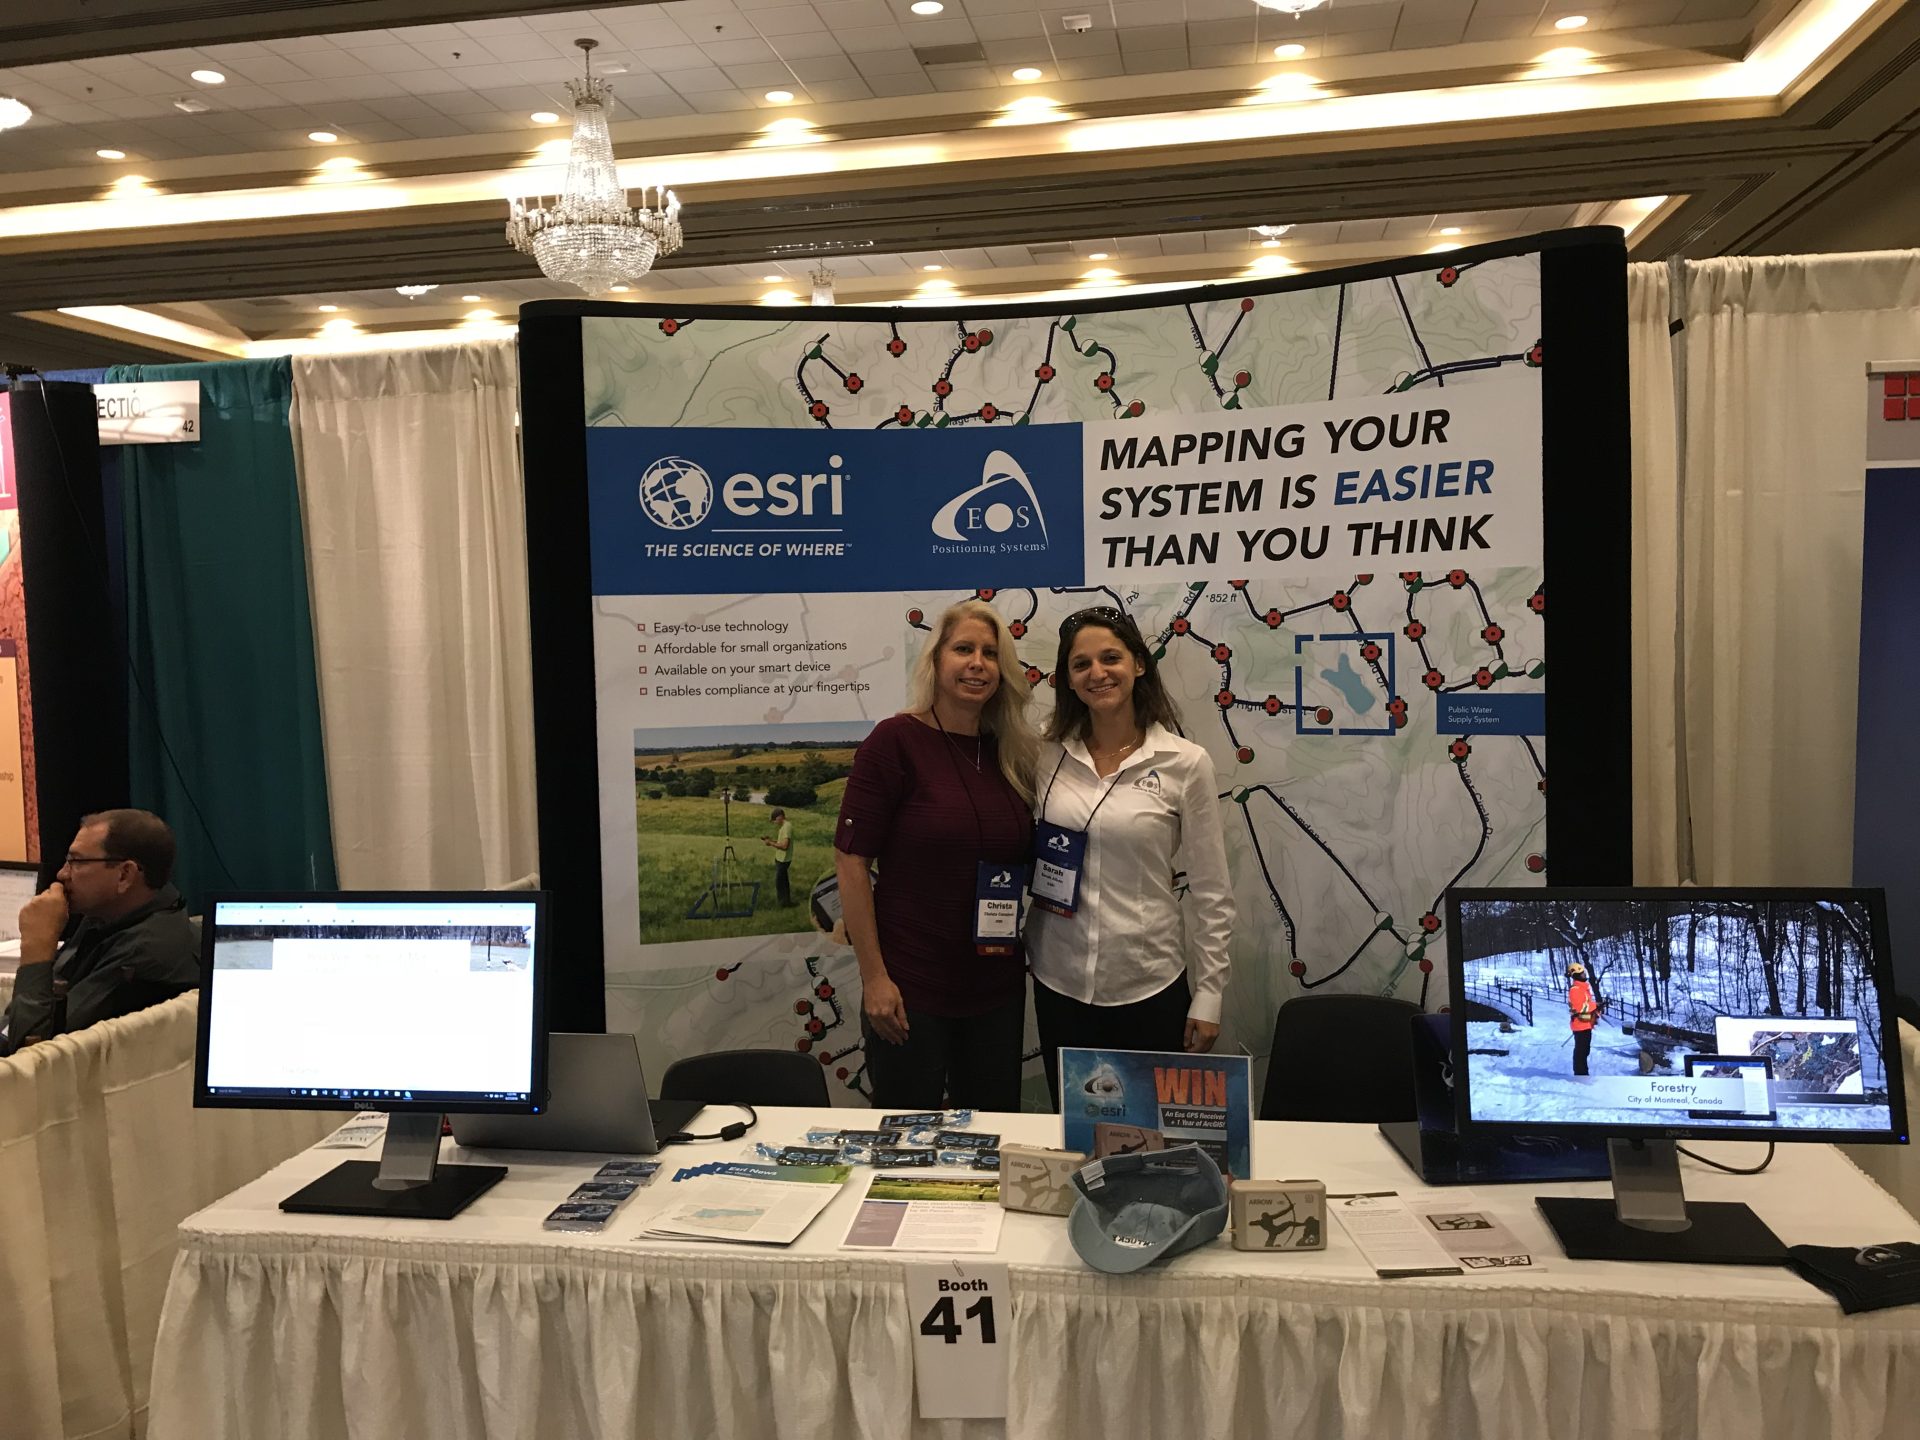 Esri Water Eos Positioning Systems map your system Christa Campbell, Esri, ArcGIS, GPS, GIS